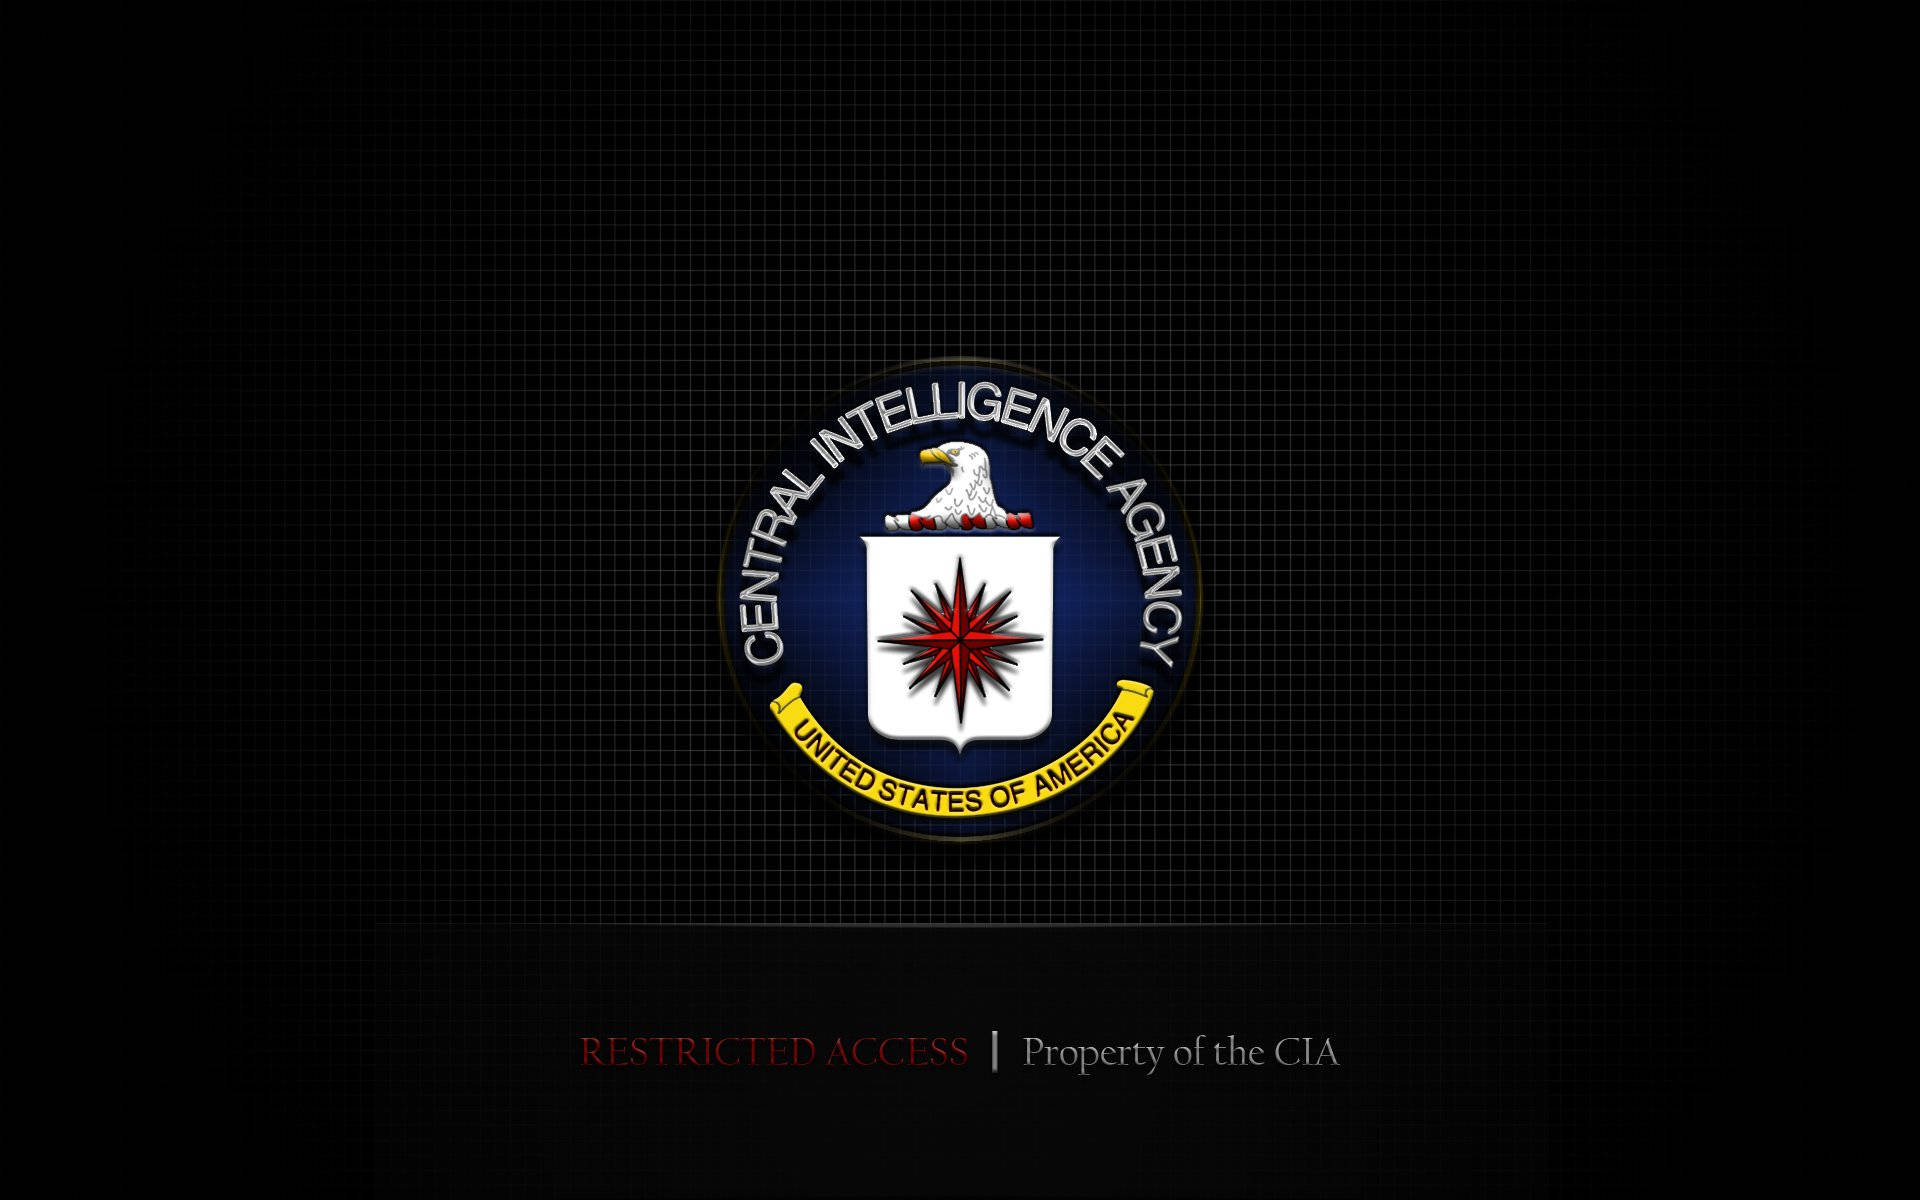 Cia Logo Restricted Access Background